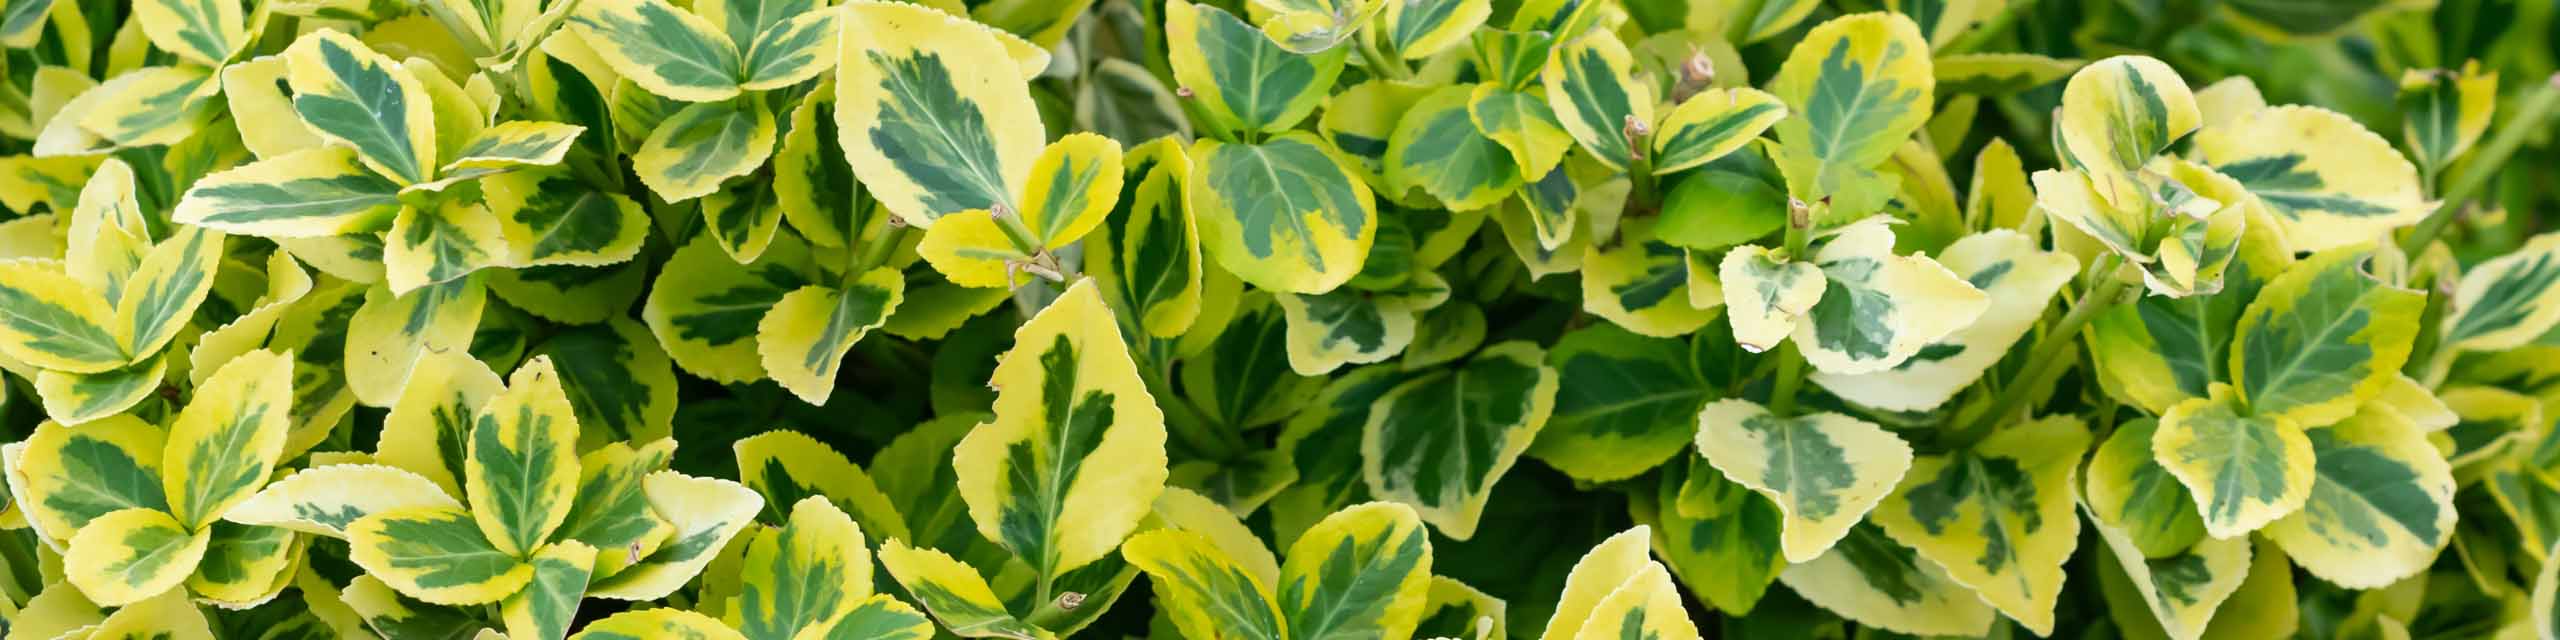 Leaves of an Euonymus shrub with yellow and green variegation.